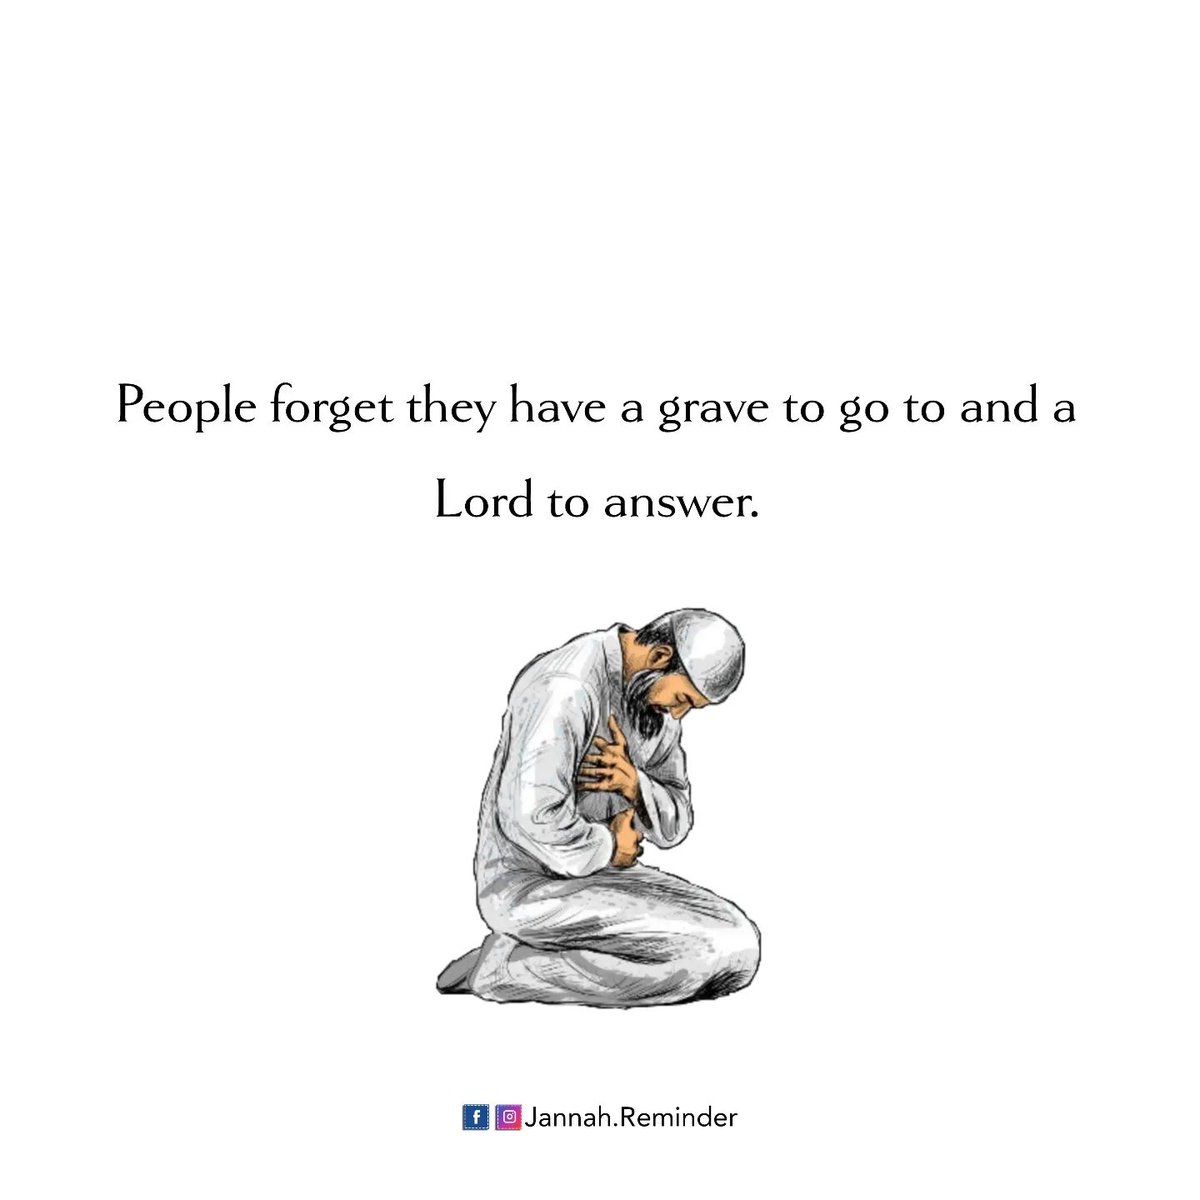 Most times, people forget that they have a grave to go to, and a Lord to answer to...